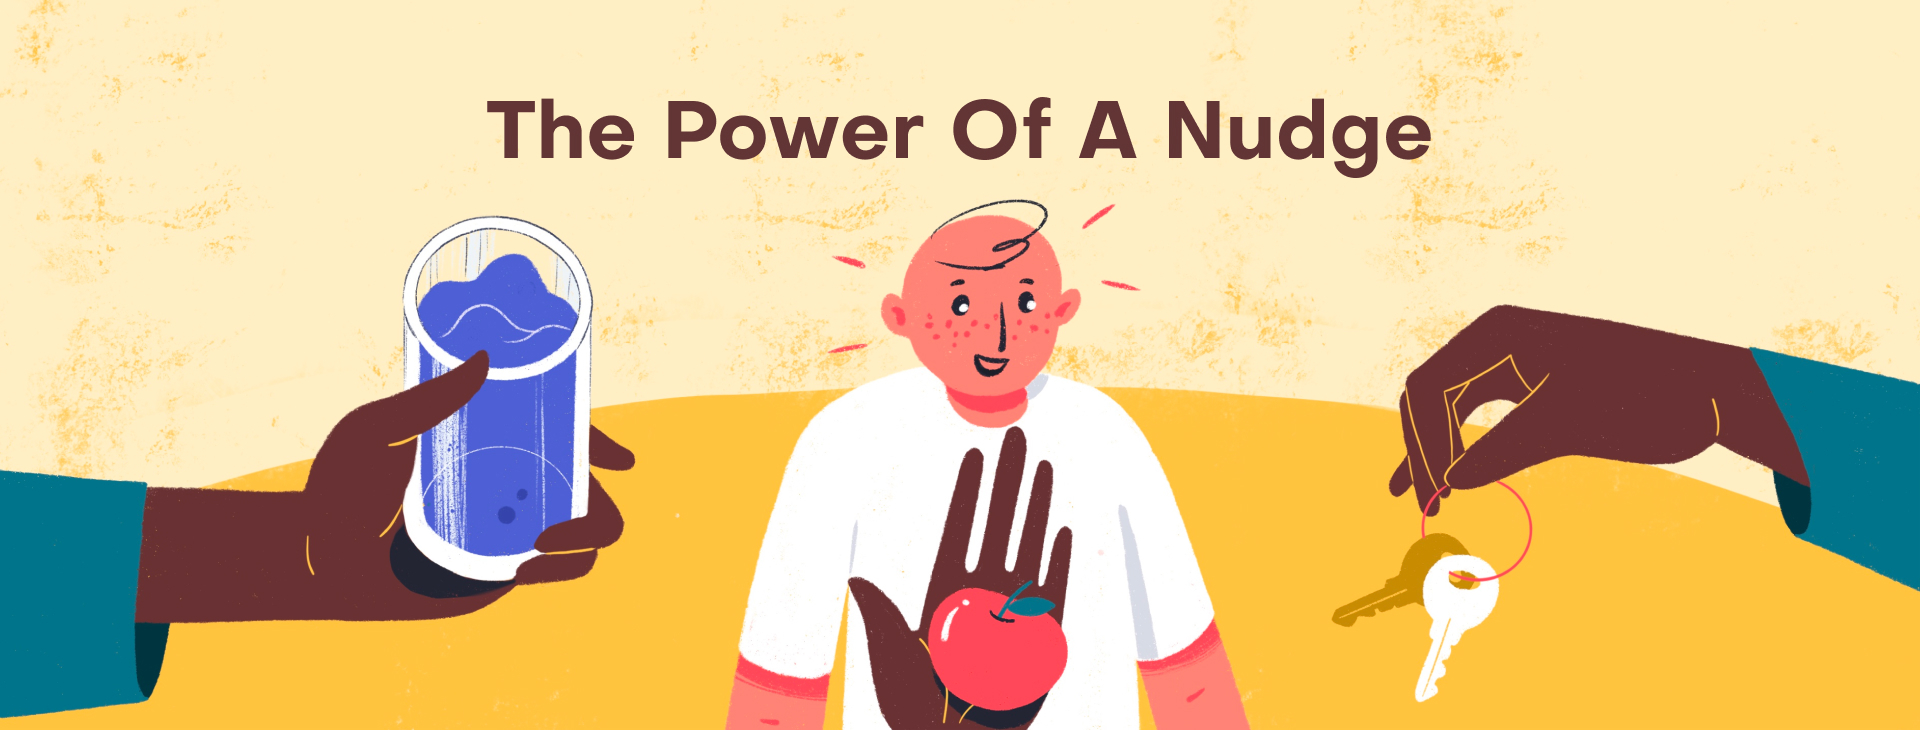 The Power of a Nudge